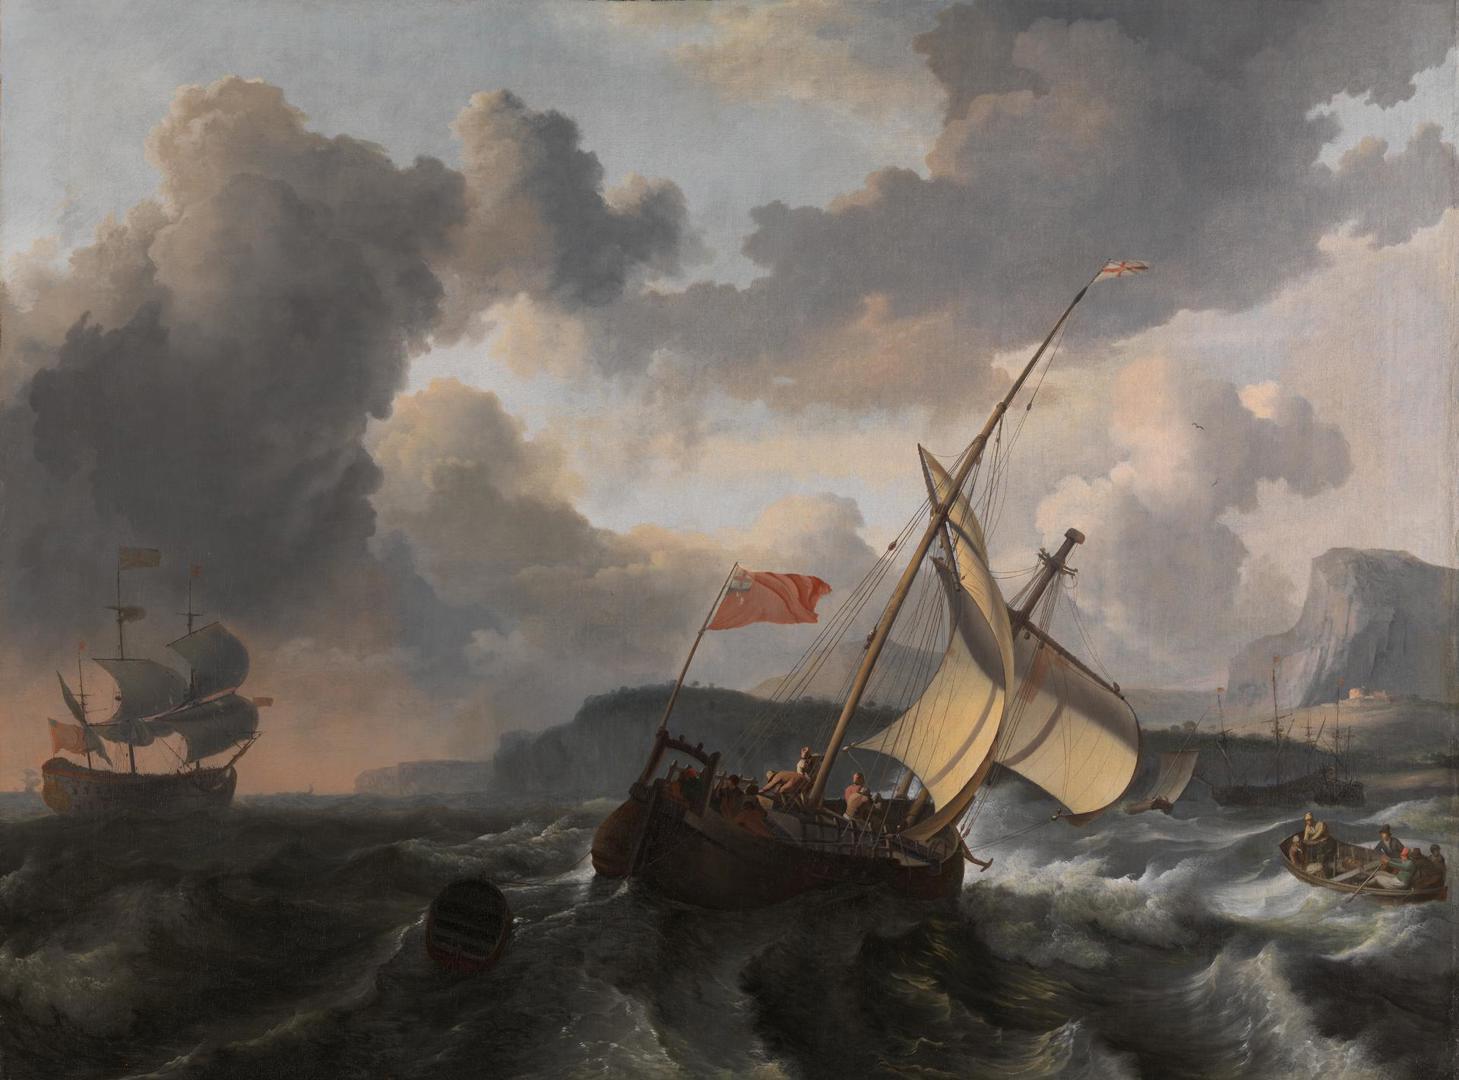 An English Vessel and a Man-of-war in a Rough Sea by Ludolf Bakhuizen